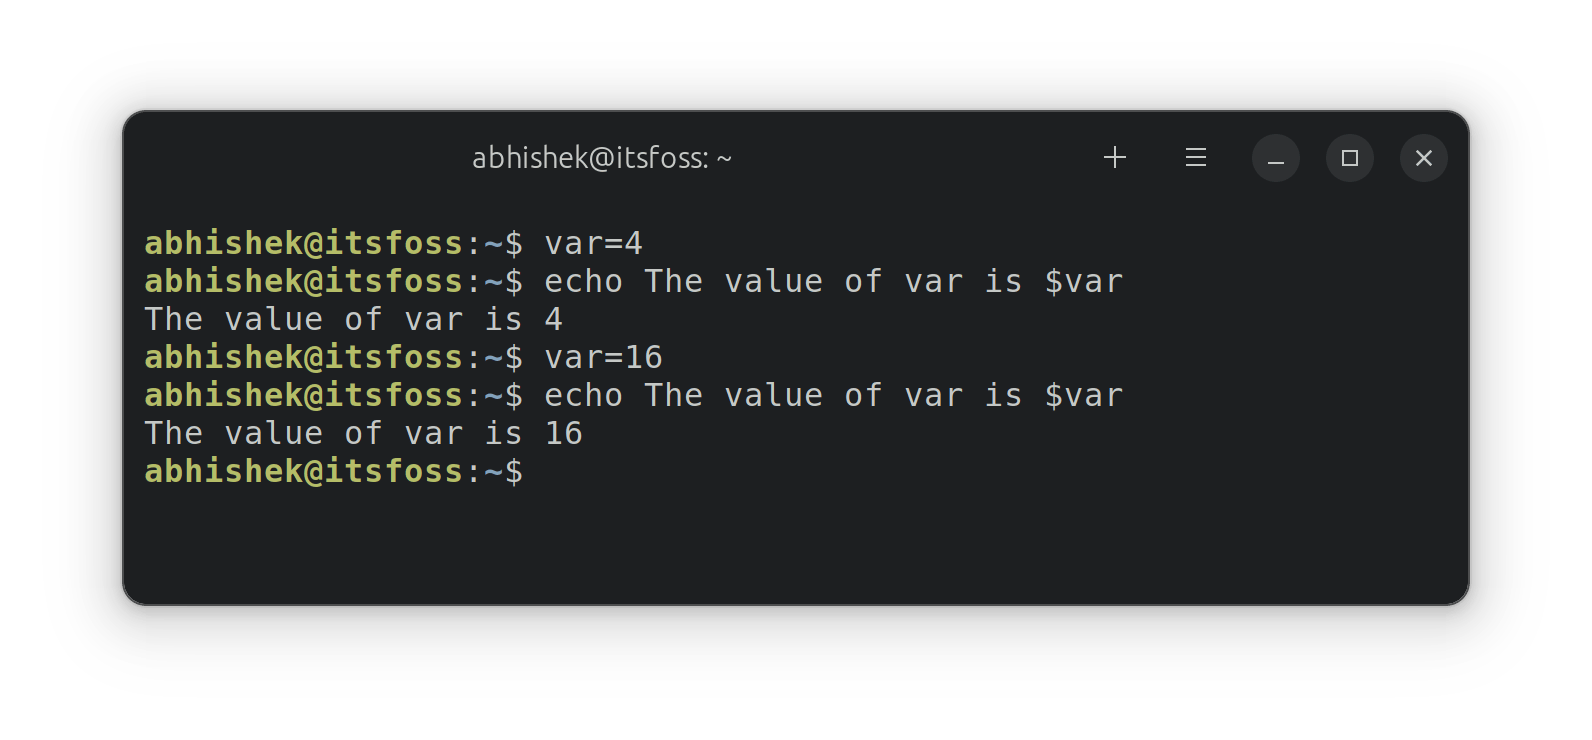 Using variables in shell